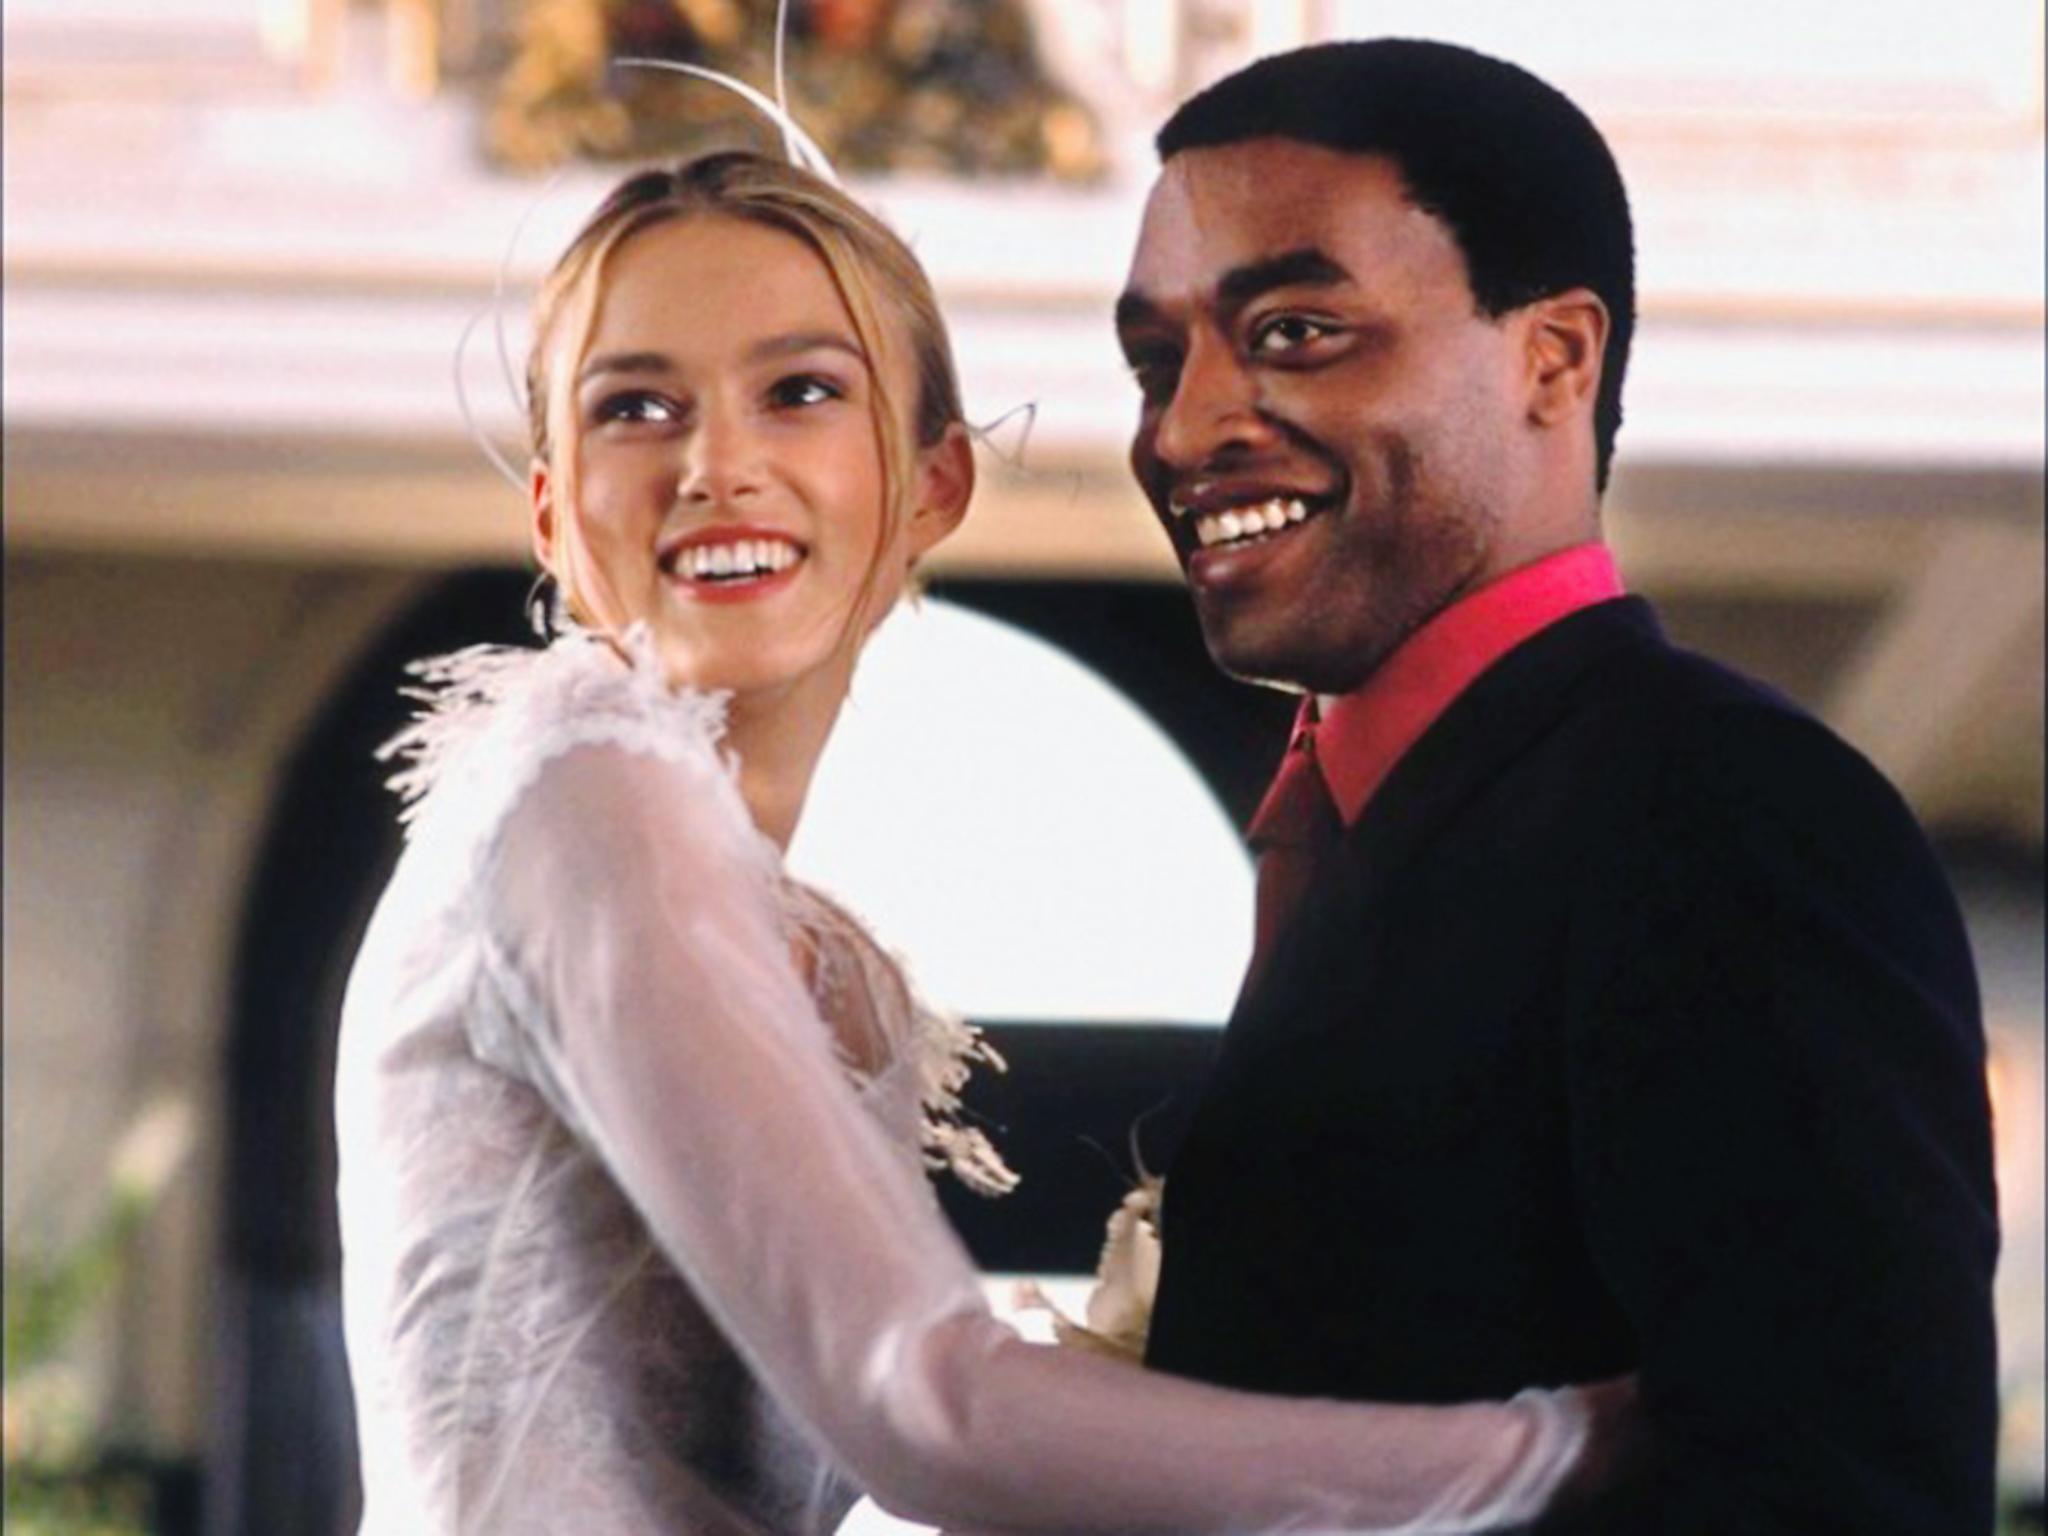 Keira Knightley as Juliet and Chiwetel Ejiofor as Peter on their wedding day in 'Love Actually'